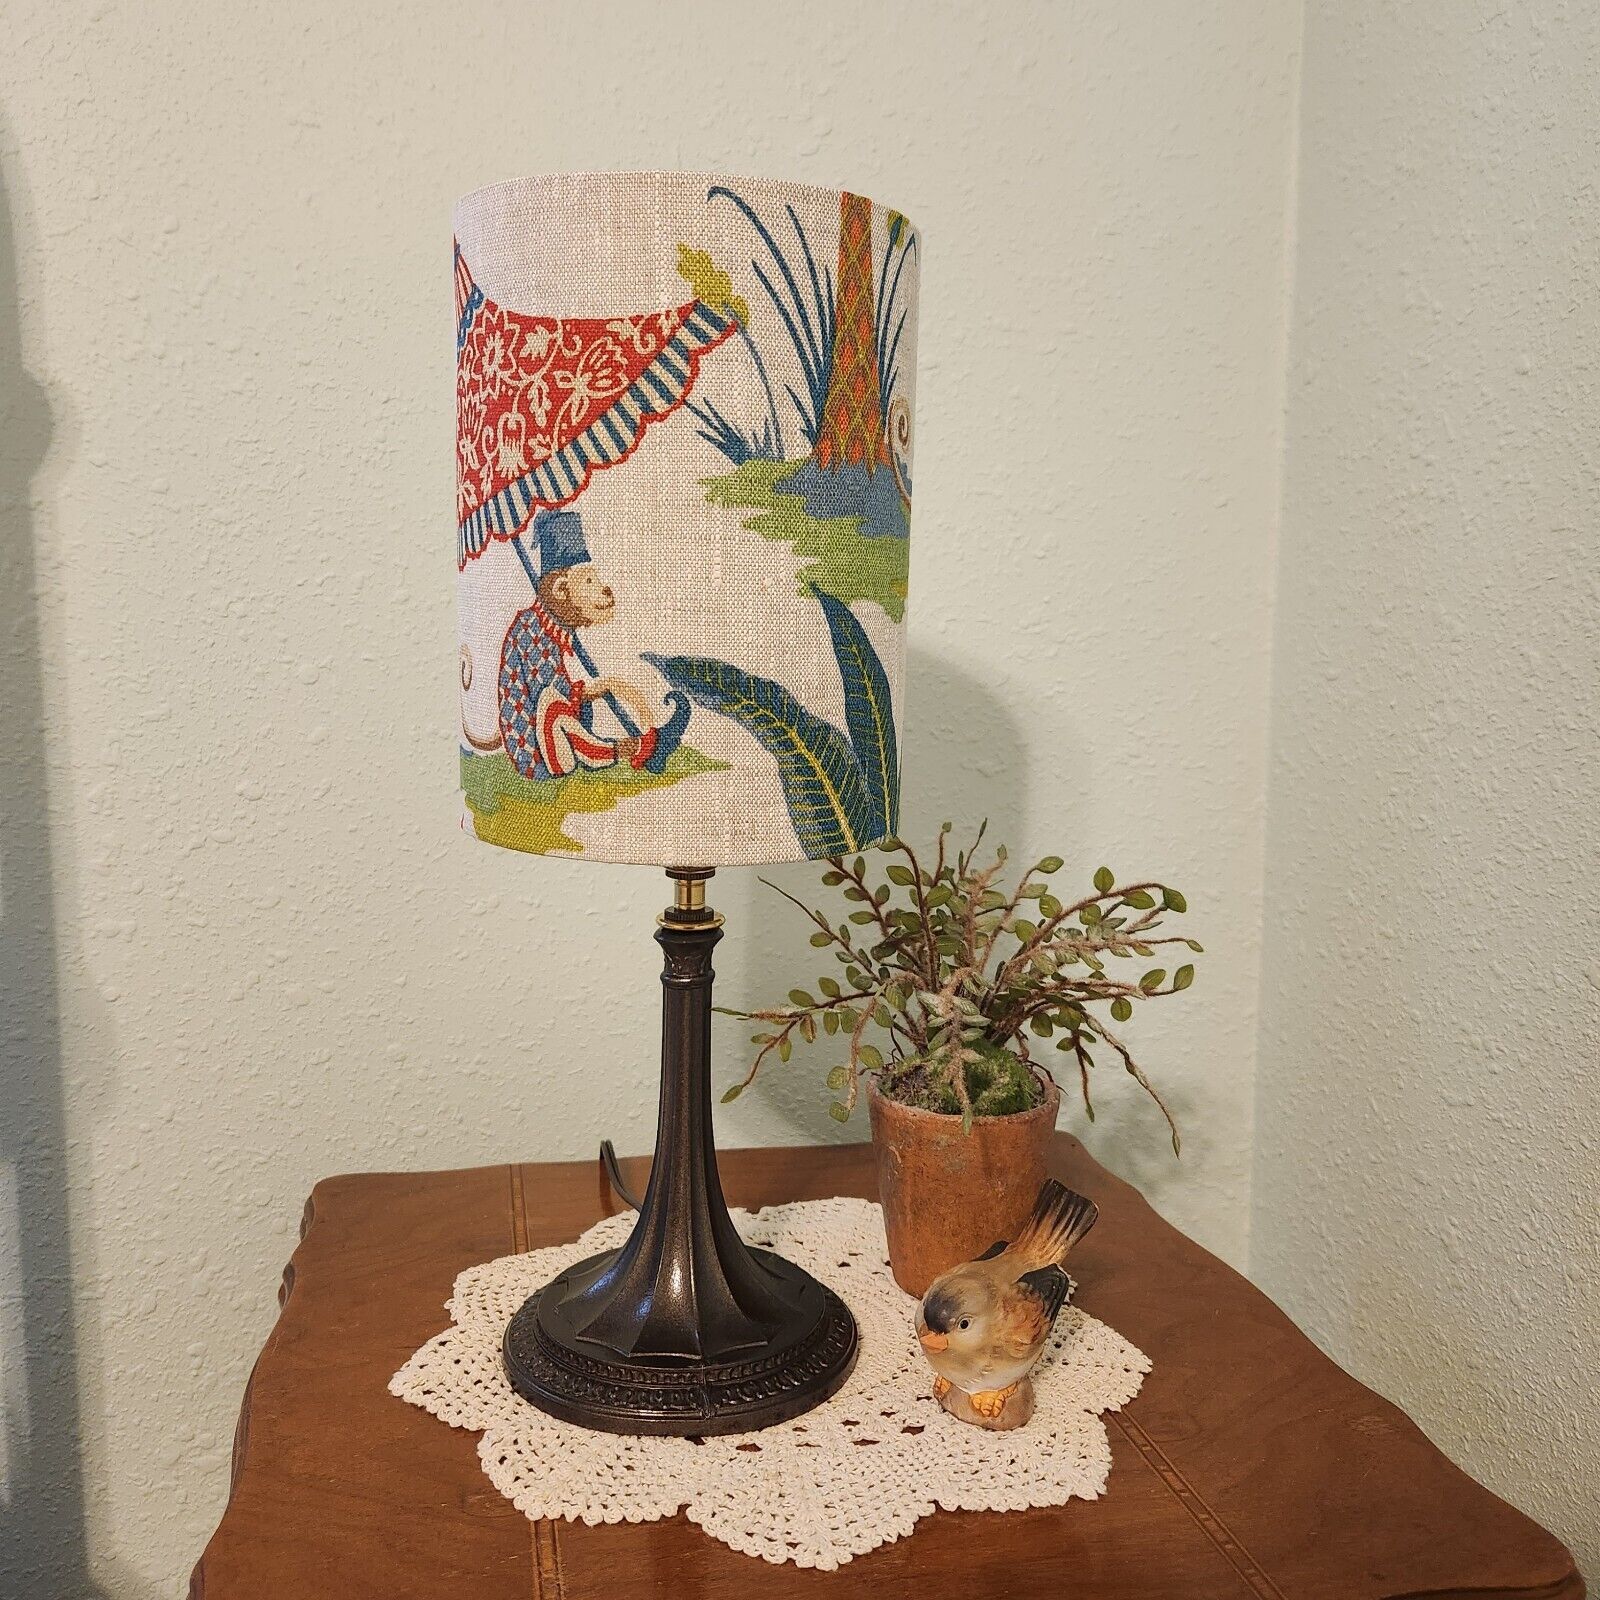 Vintage Cast Metal Lamp Base with Whimsical Style Handmade Lamp Shade